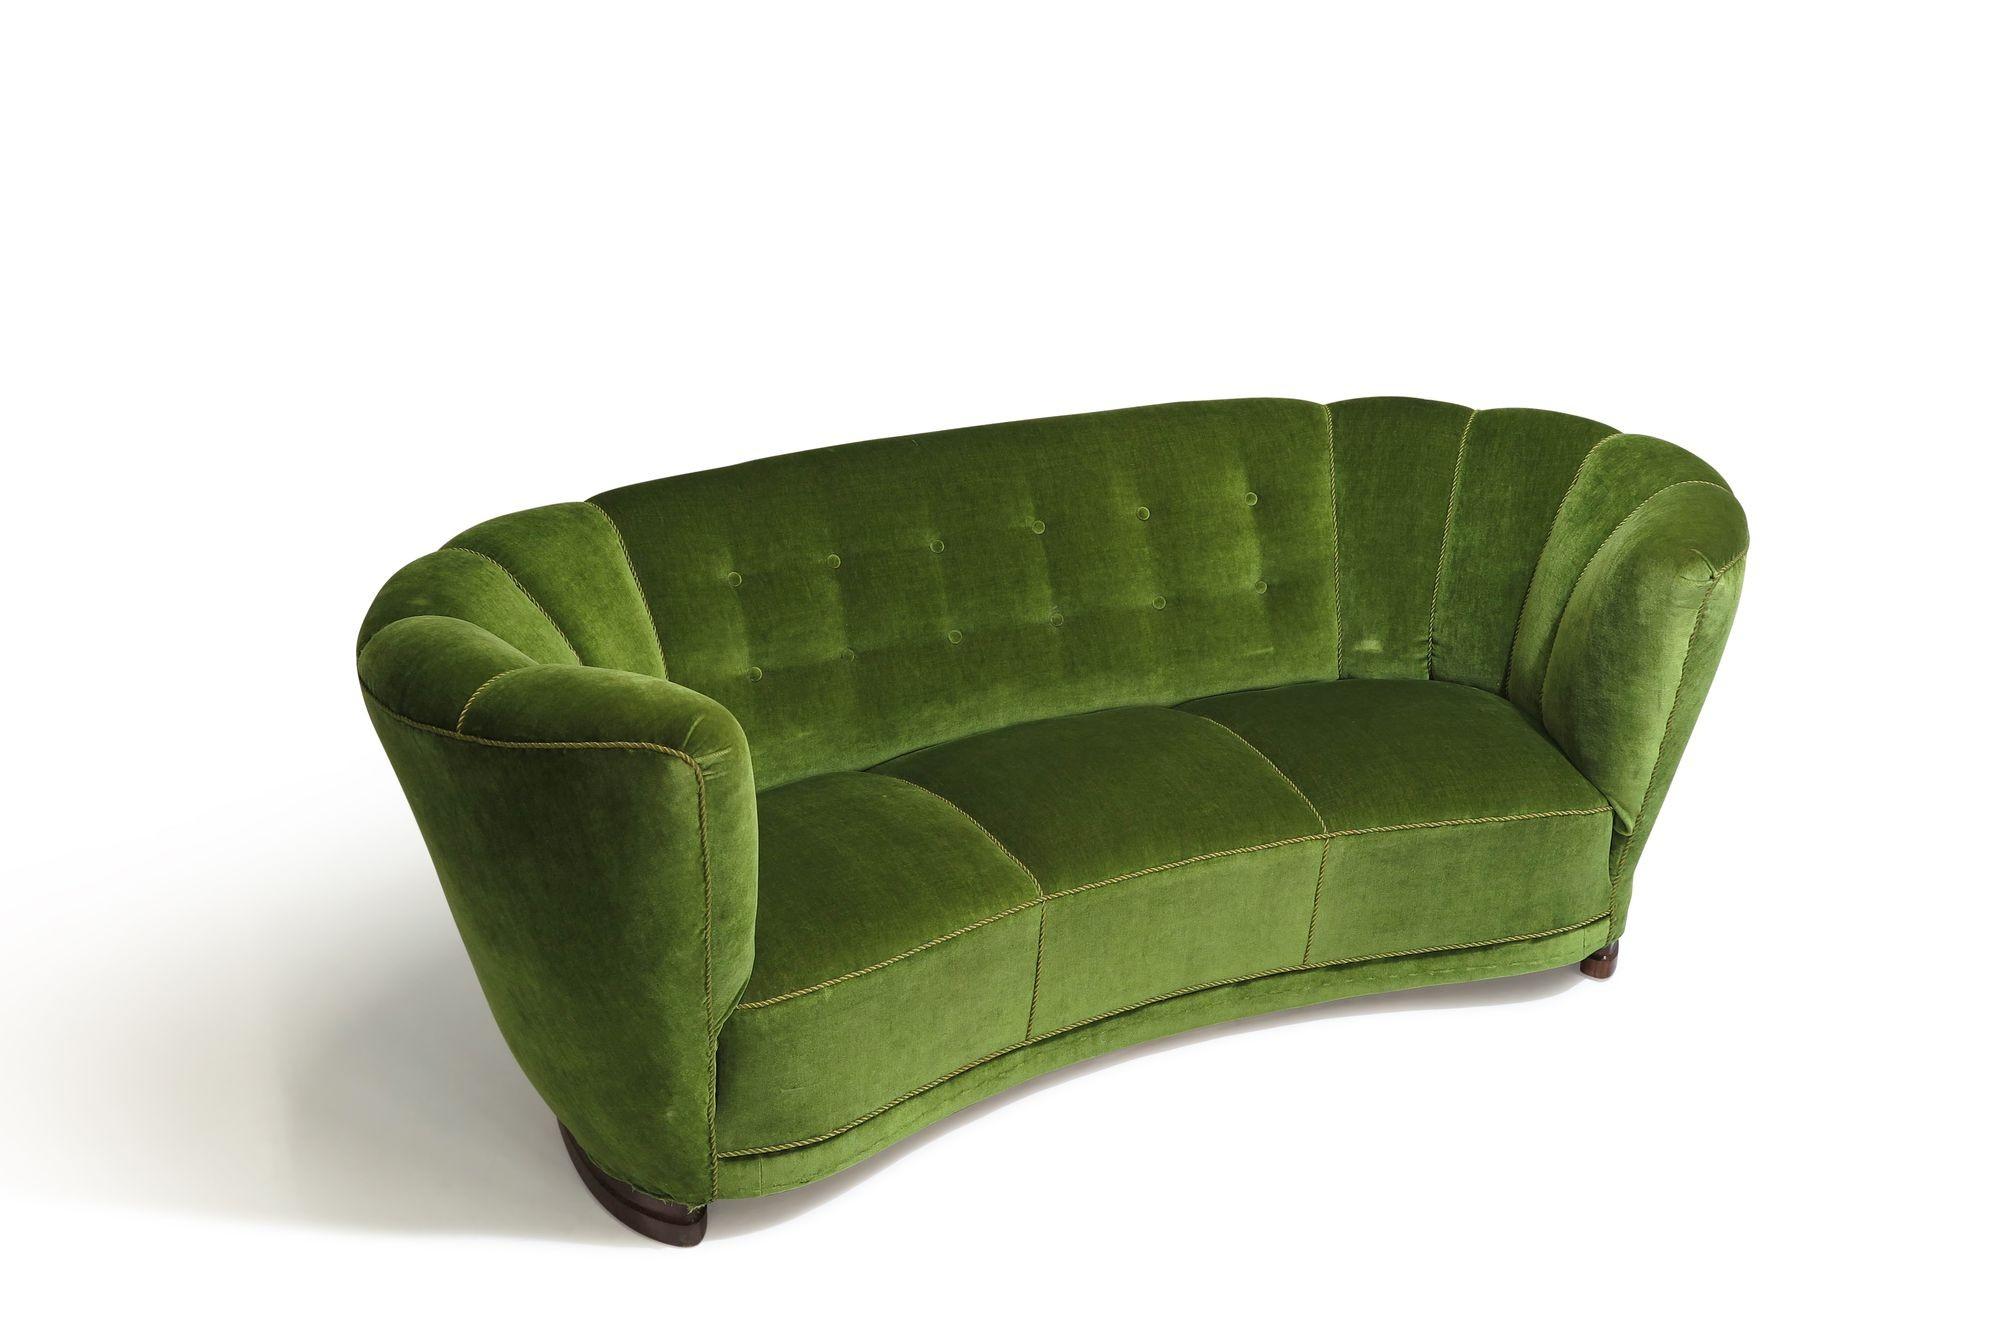 Amazing 1930s Danish Deco button-tufted settee upholstered in the original olive-green mohair. The settee is finely crafted with a solid wood frame, eight-way hand-tied copper springs, horsehair, and cotton padding, all covered in the original green